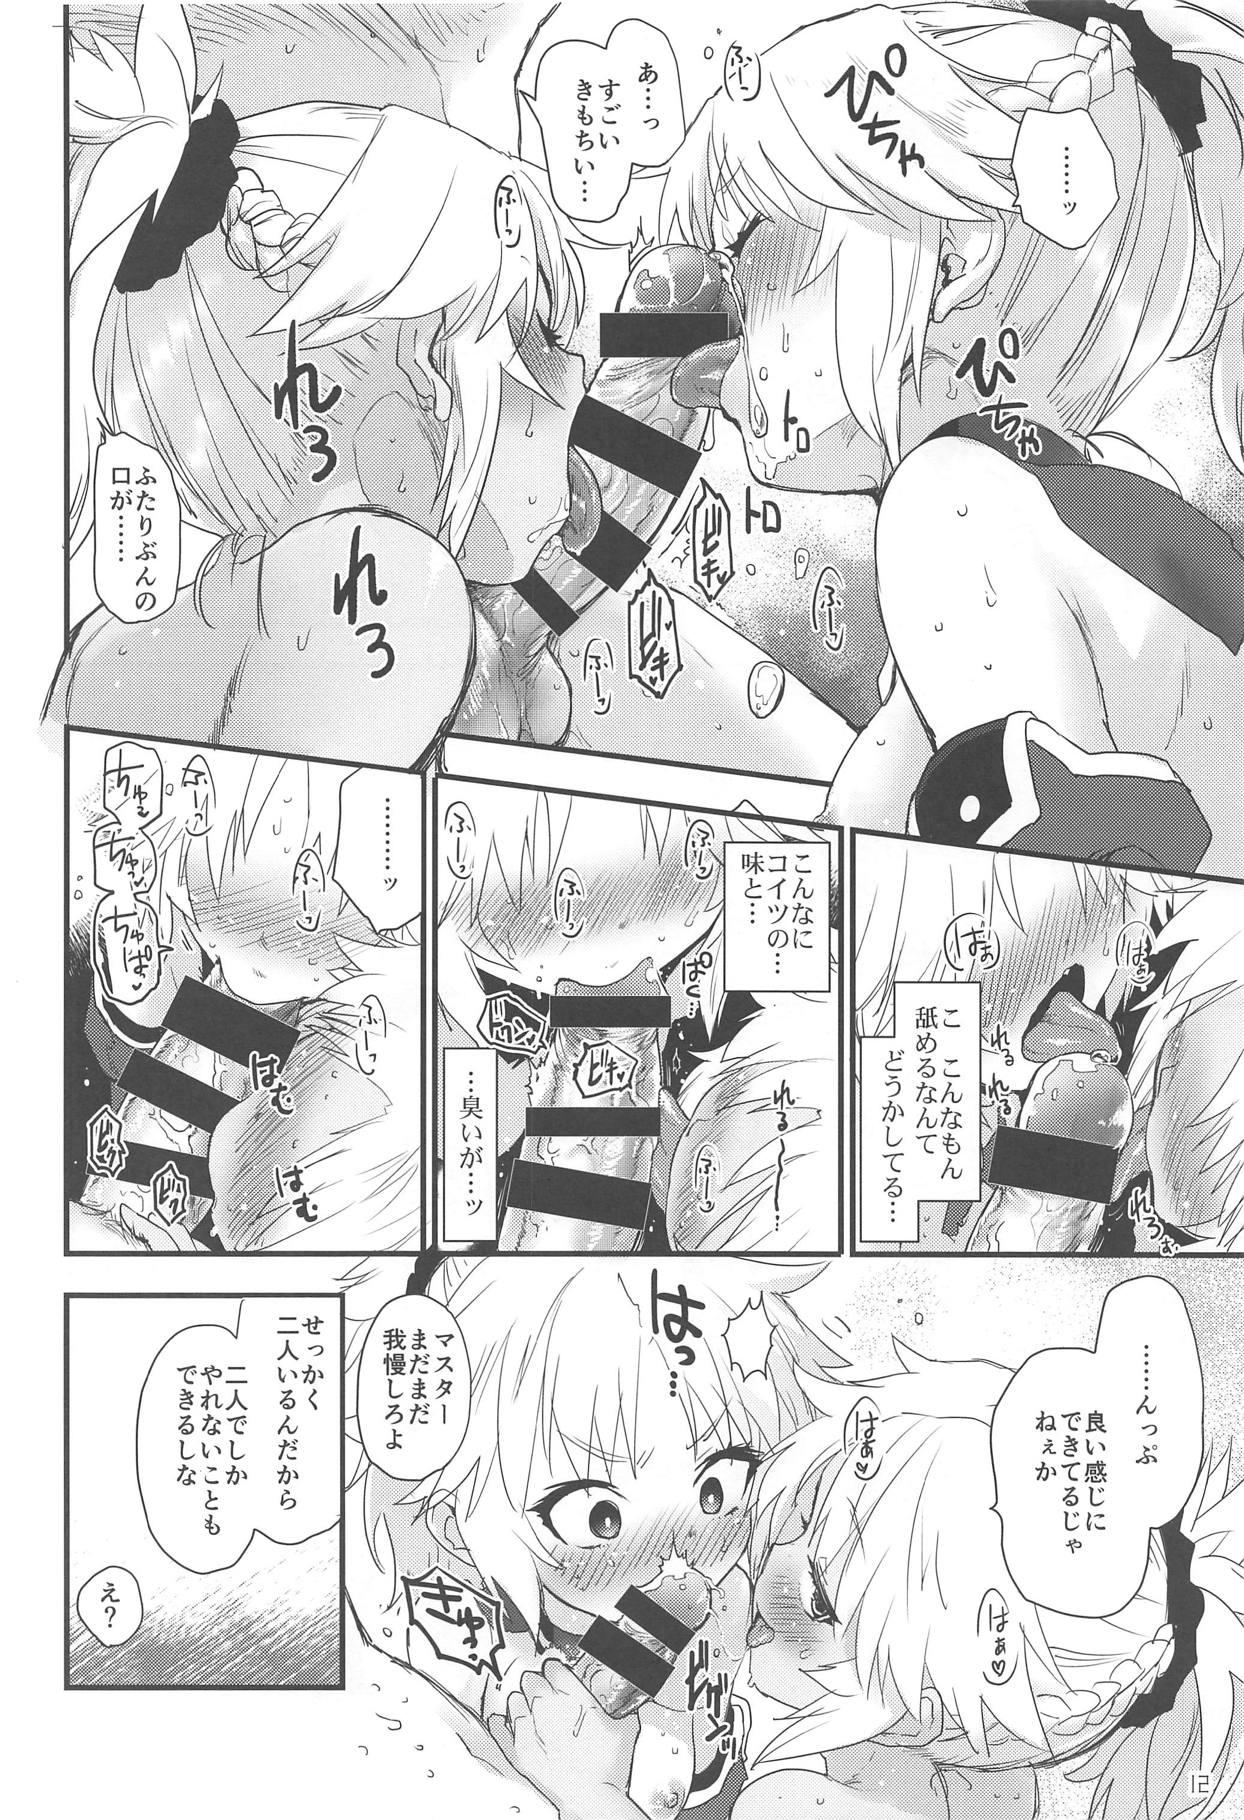 Awesome Honeys - Fate grand order Para - Page 11